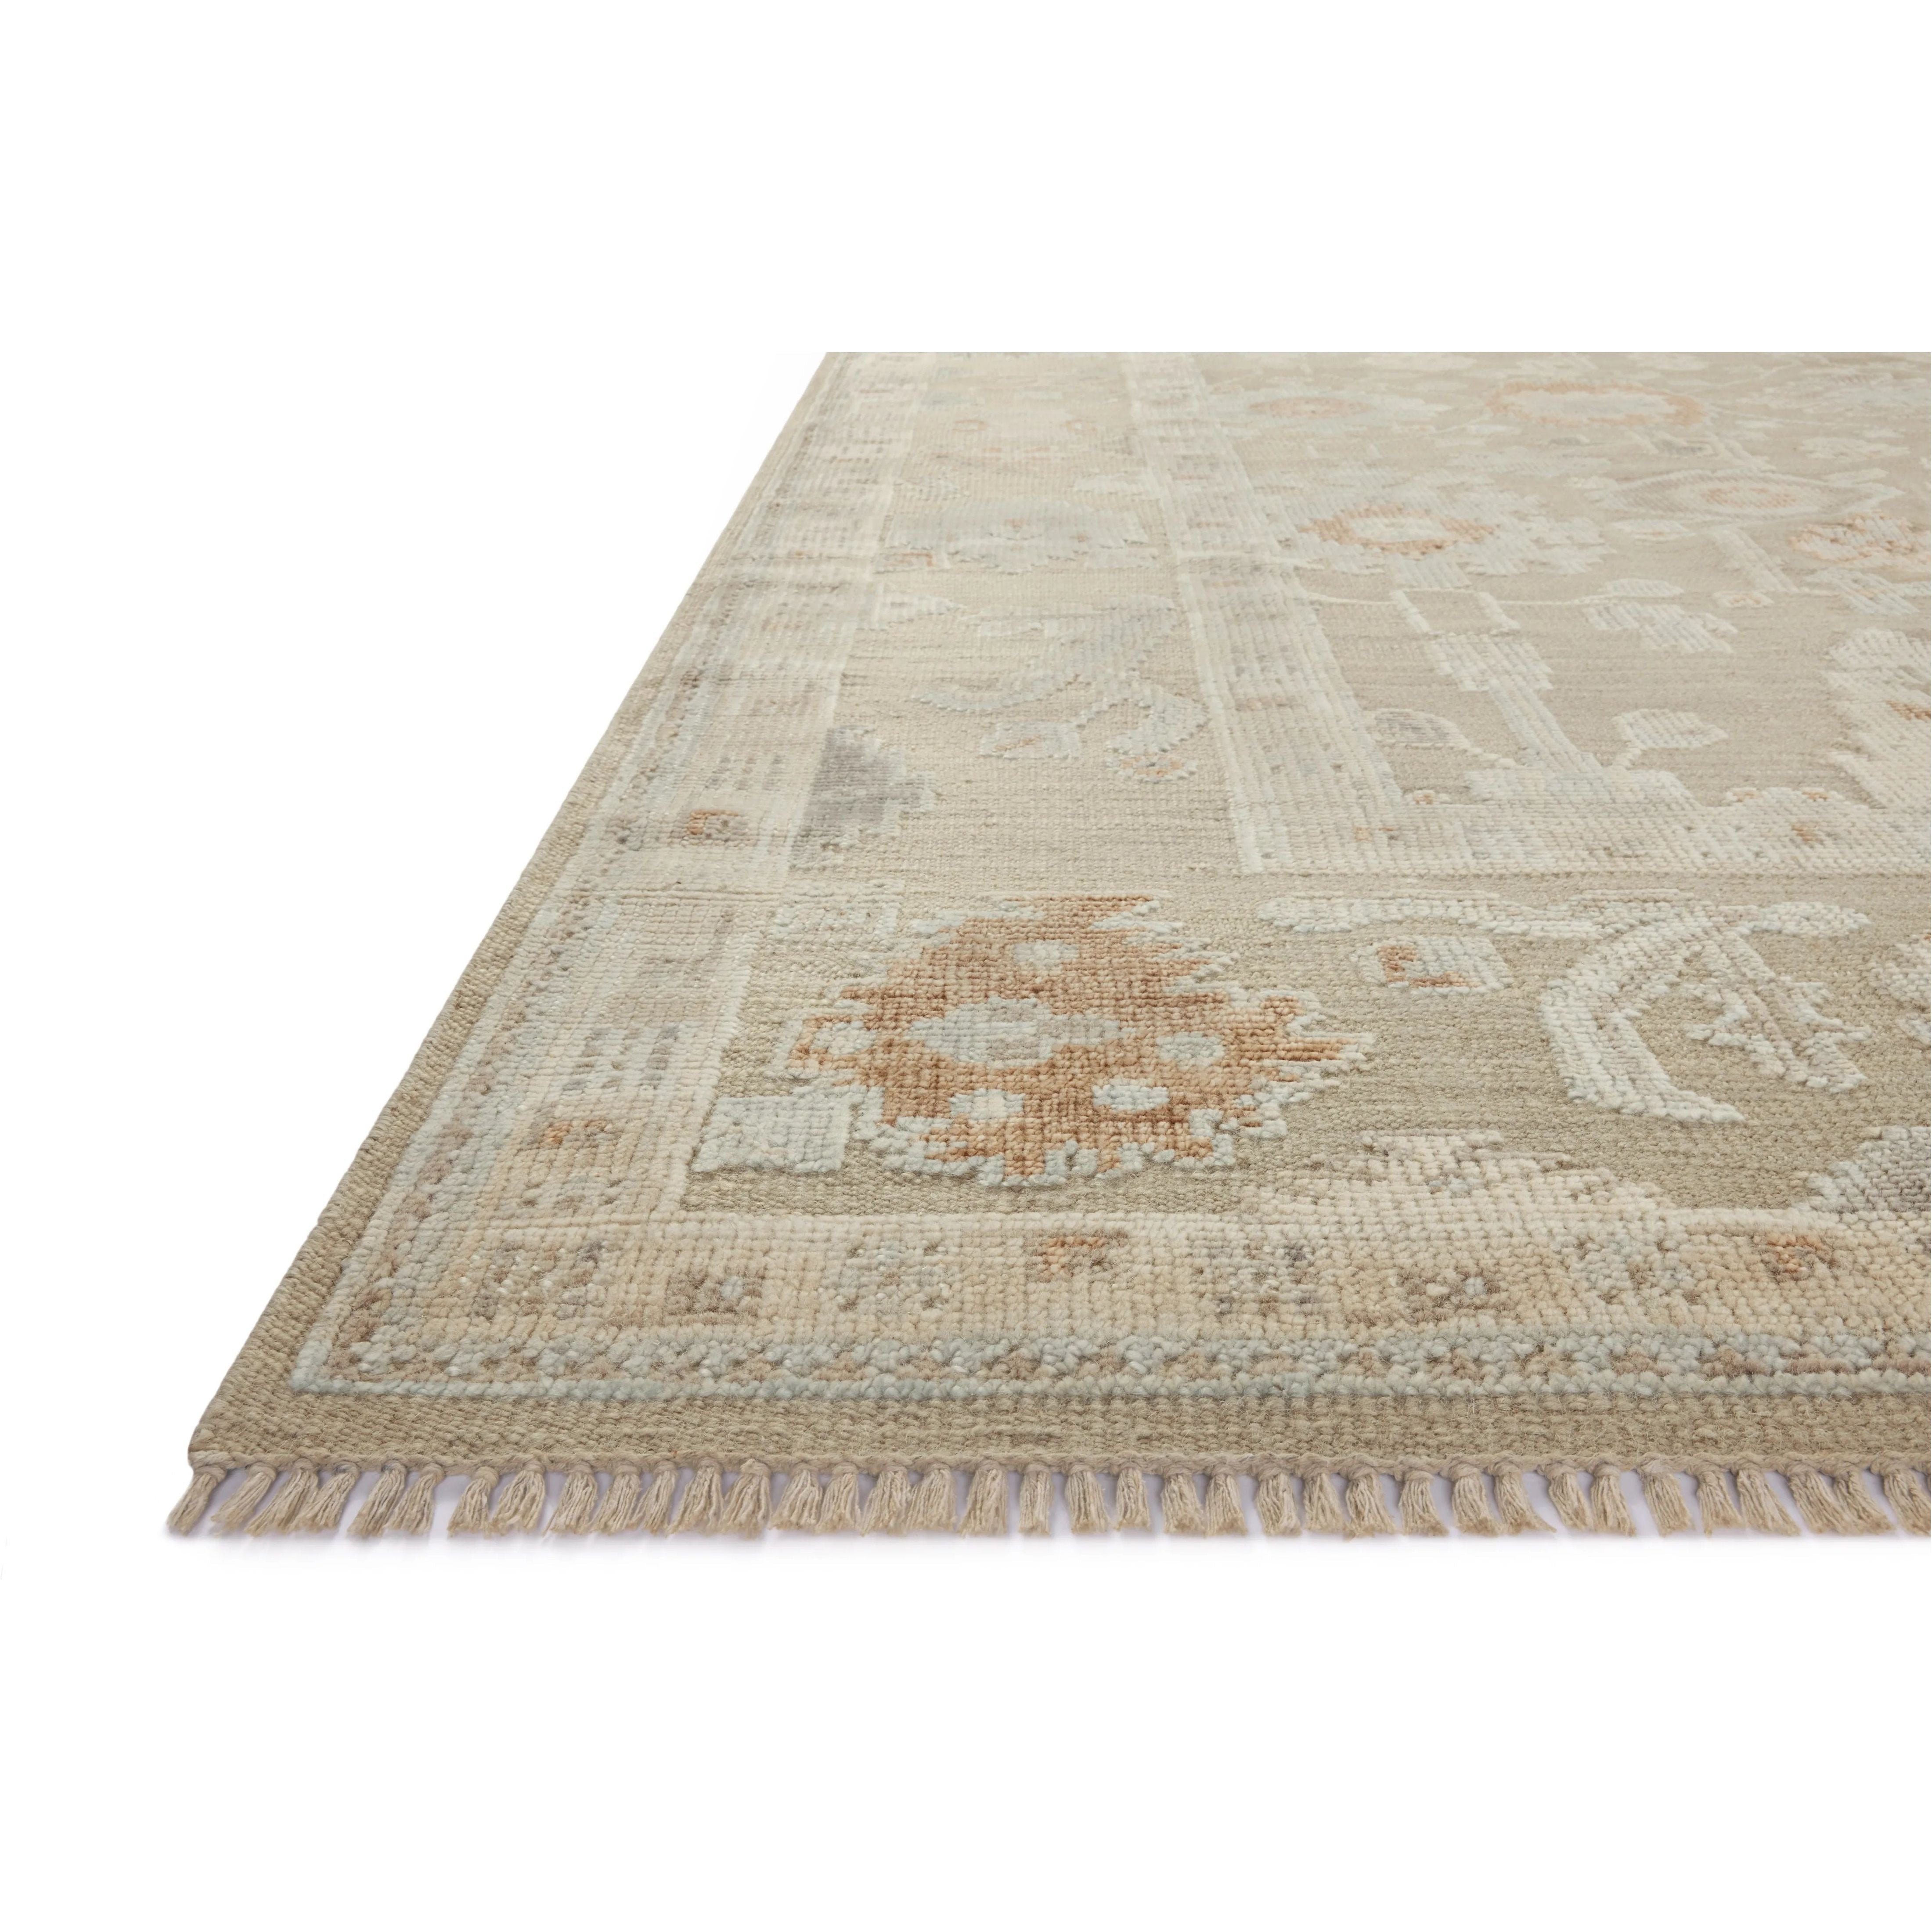 The Marianne Collection is a hand-knotted wool area rug with vintage medallion motifs and short edge fringe, inspired by many one-of-a-kind pieces. The rugâ€™s elegantly neutral palette feels modern, while the rugâ€™s overall aesthetic is timeless. Amethyst Home provides interior design, new home construction design consulting, vintage area rugs, and lighting in the Alpharetta metro area.